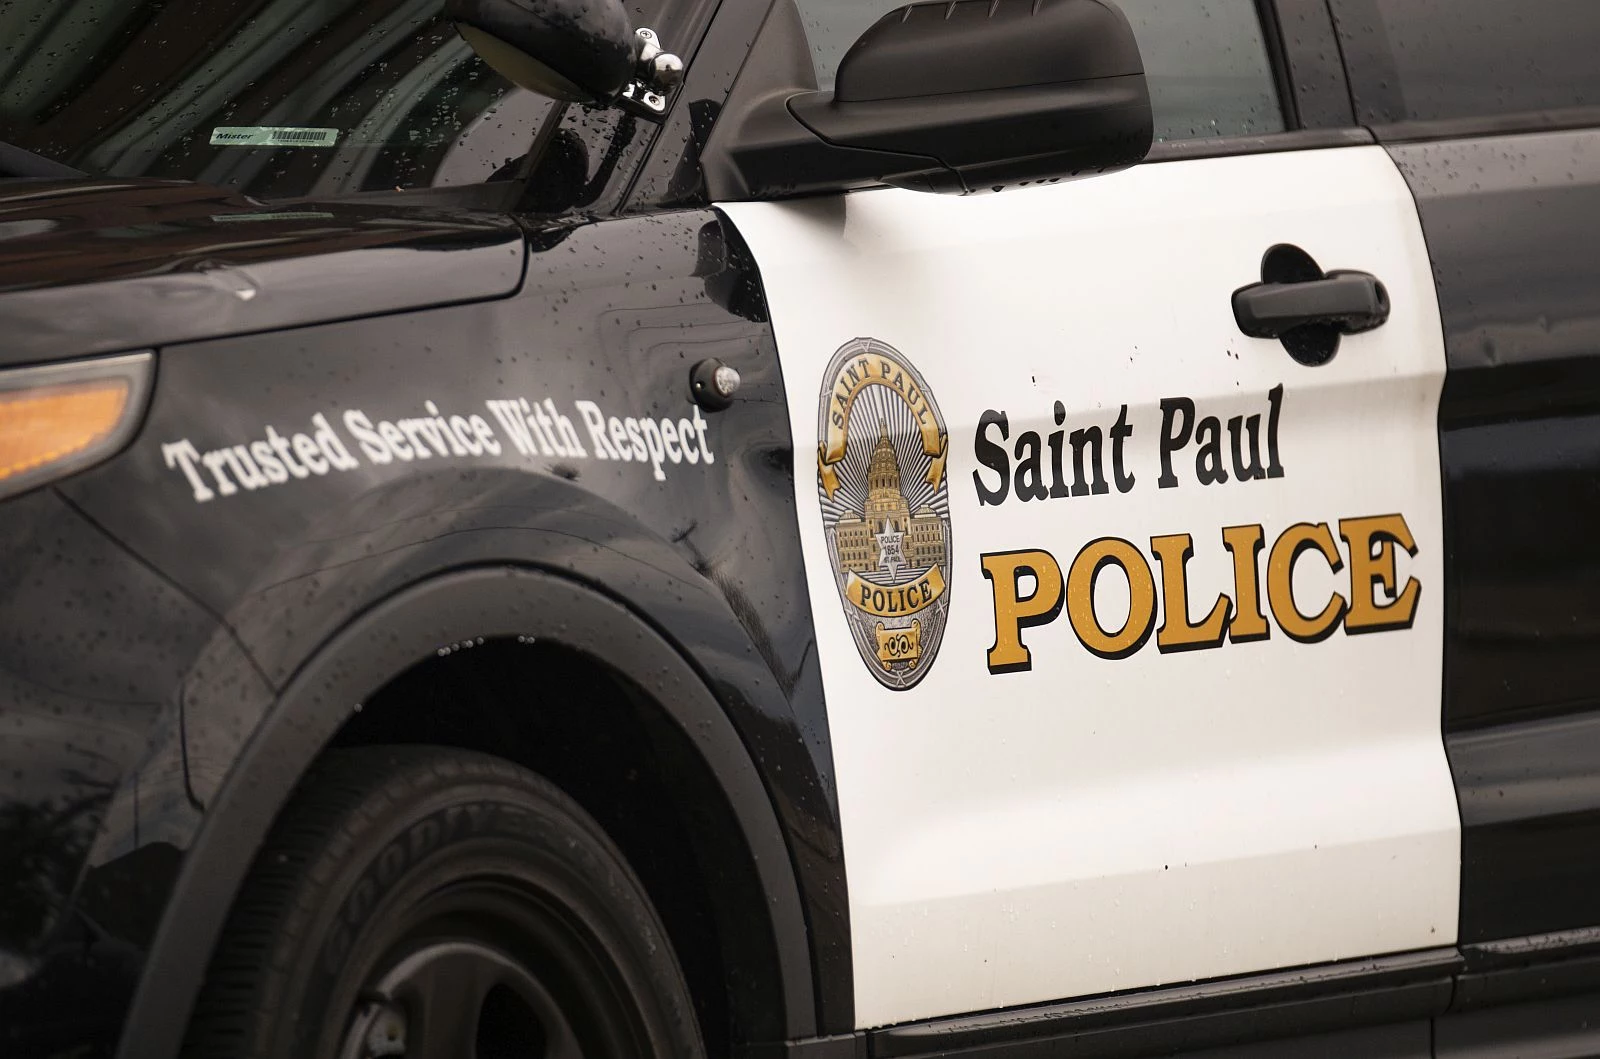 Man Arrested For Shooting in St. Paul That Left 3 People Dead